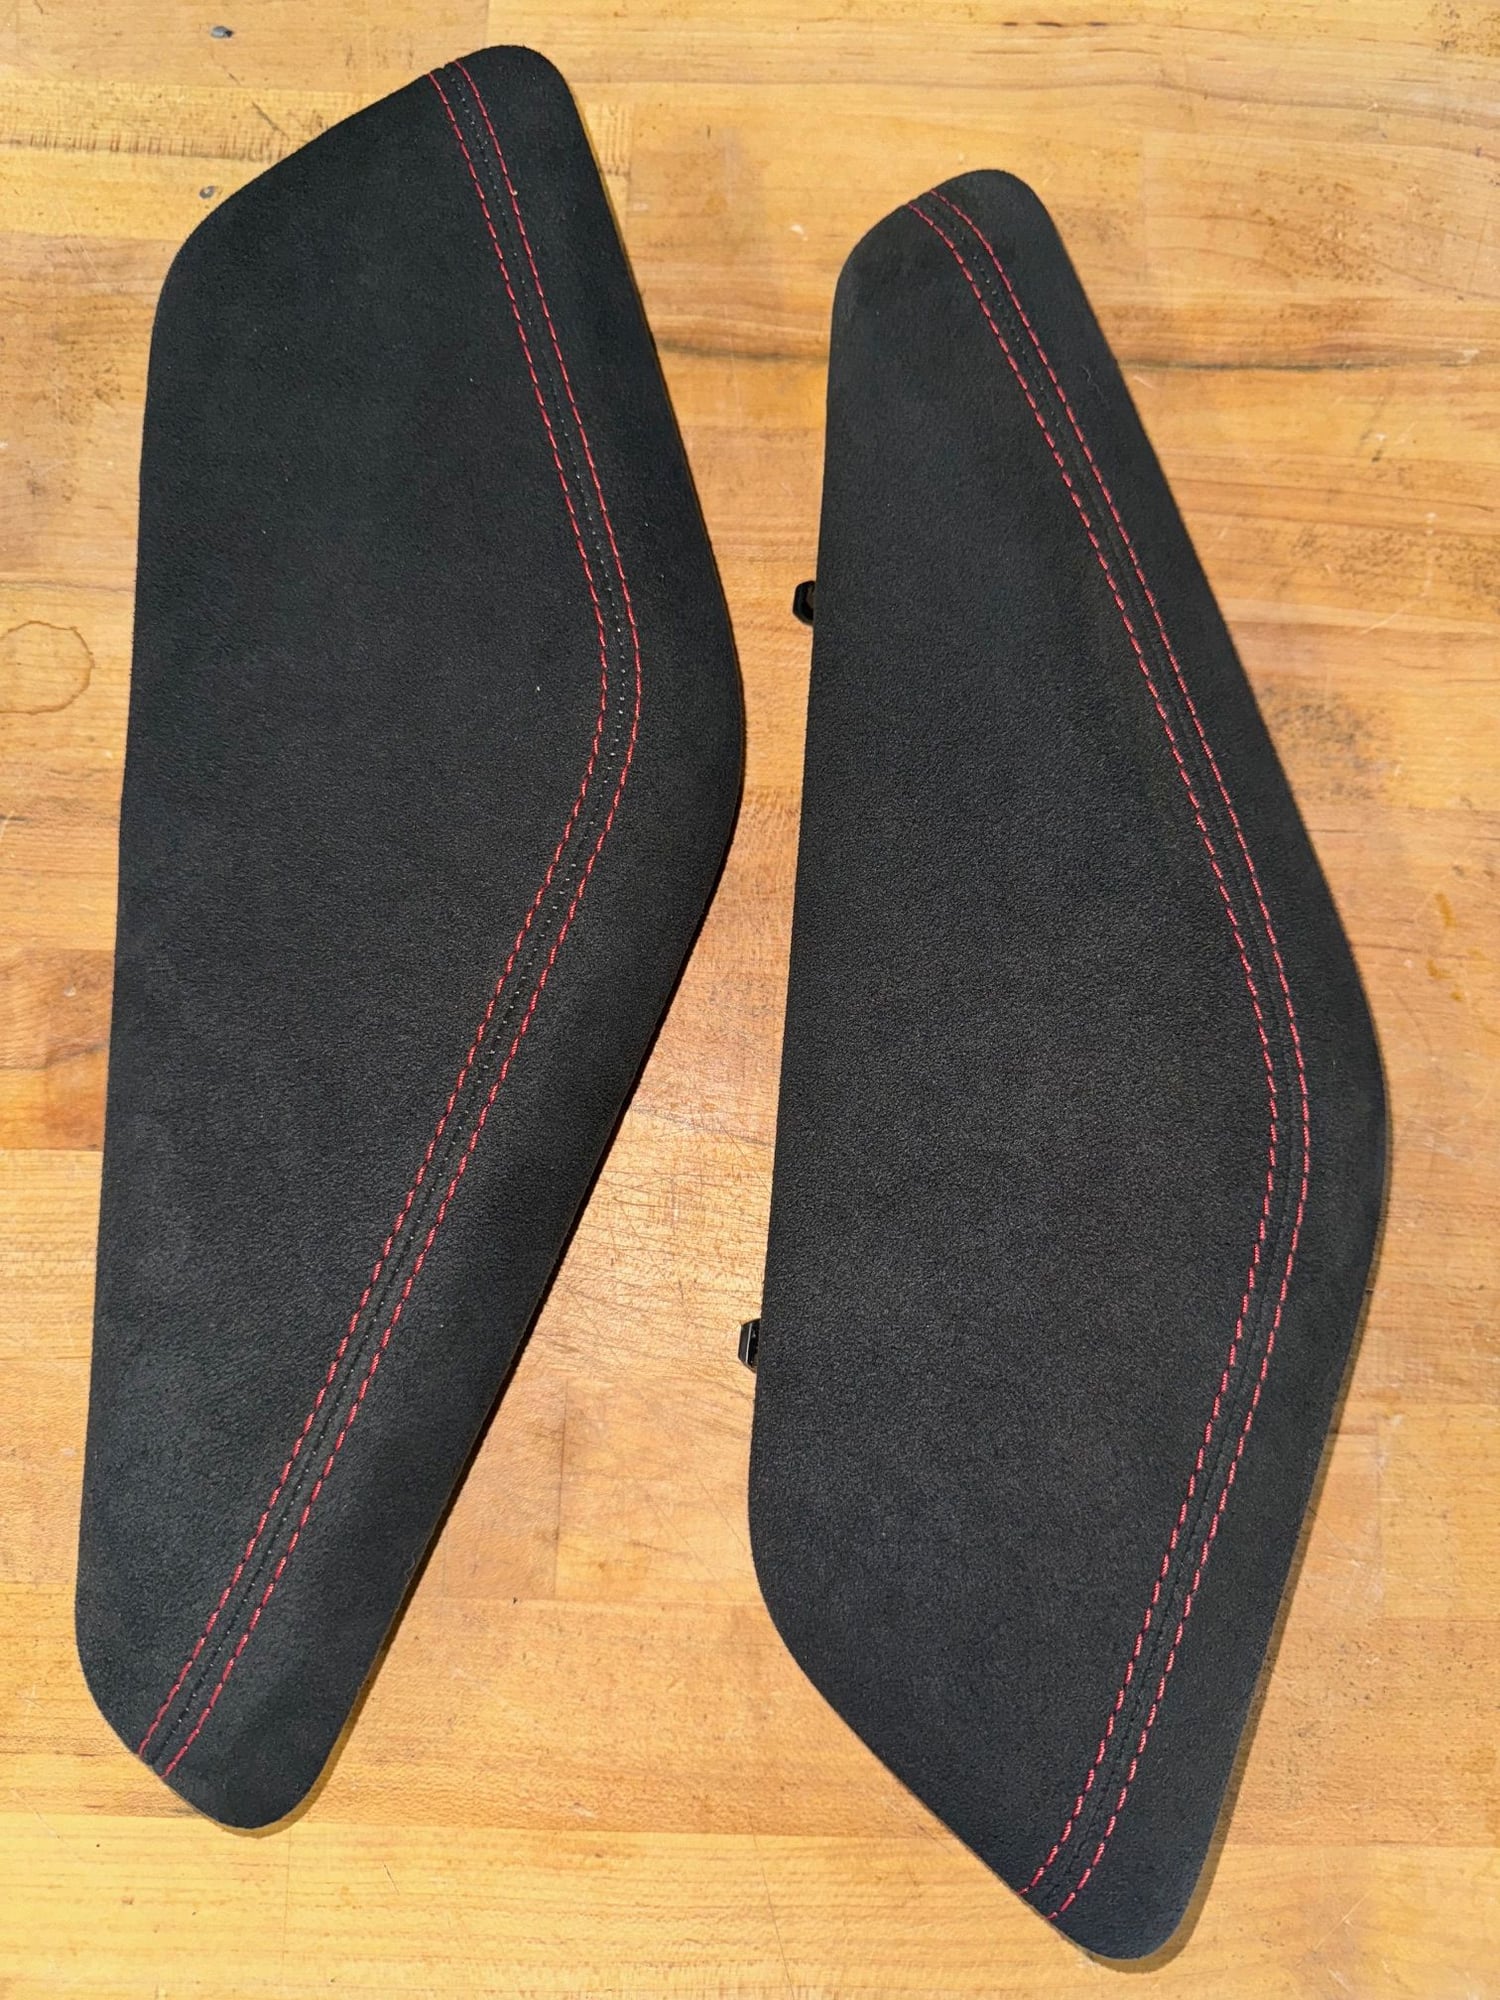 Interior/Upholstery - 992 GT3 OEM Matt Carbon Trim - Black Leather / Guards Red Stitching Pieces - Nice!! - Used - All Years  All Models - San Diego, CA 92020, United States